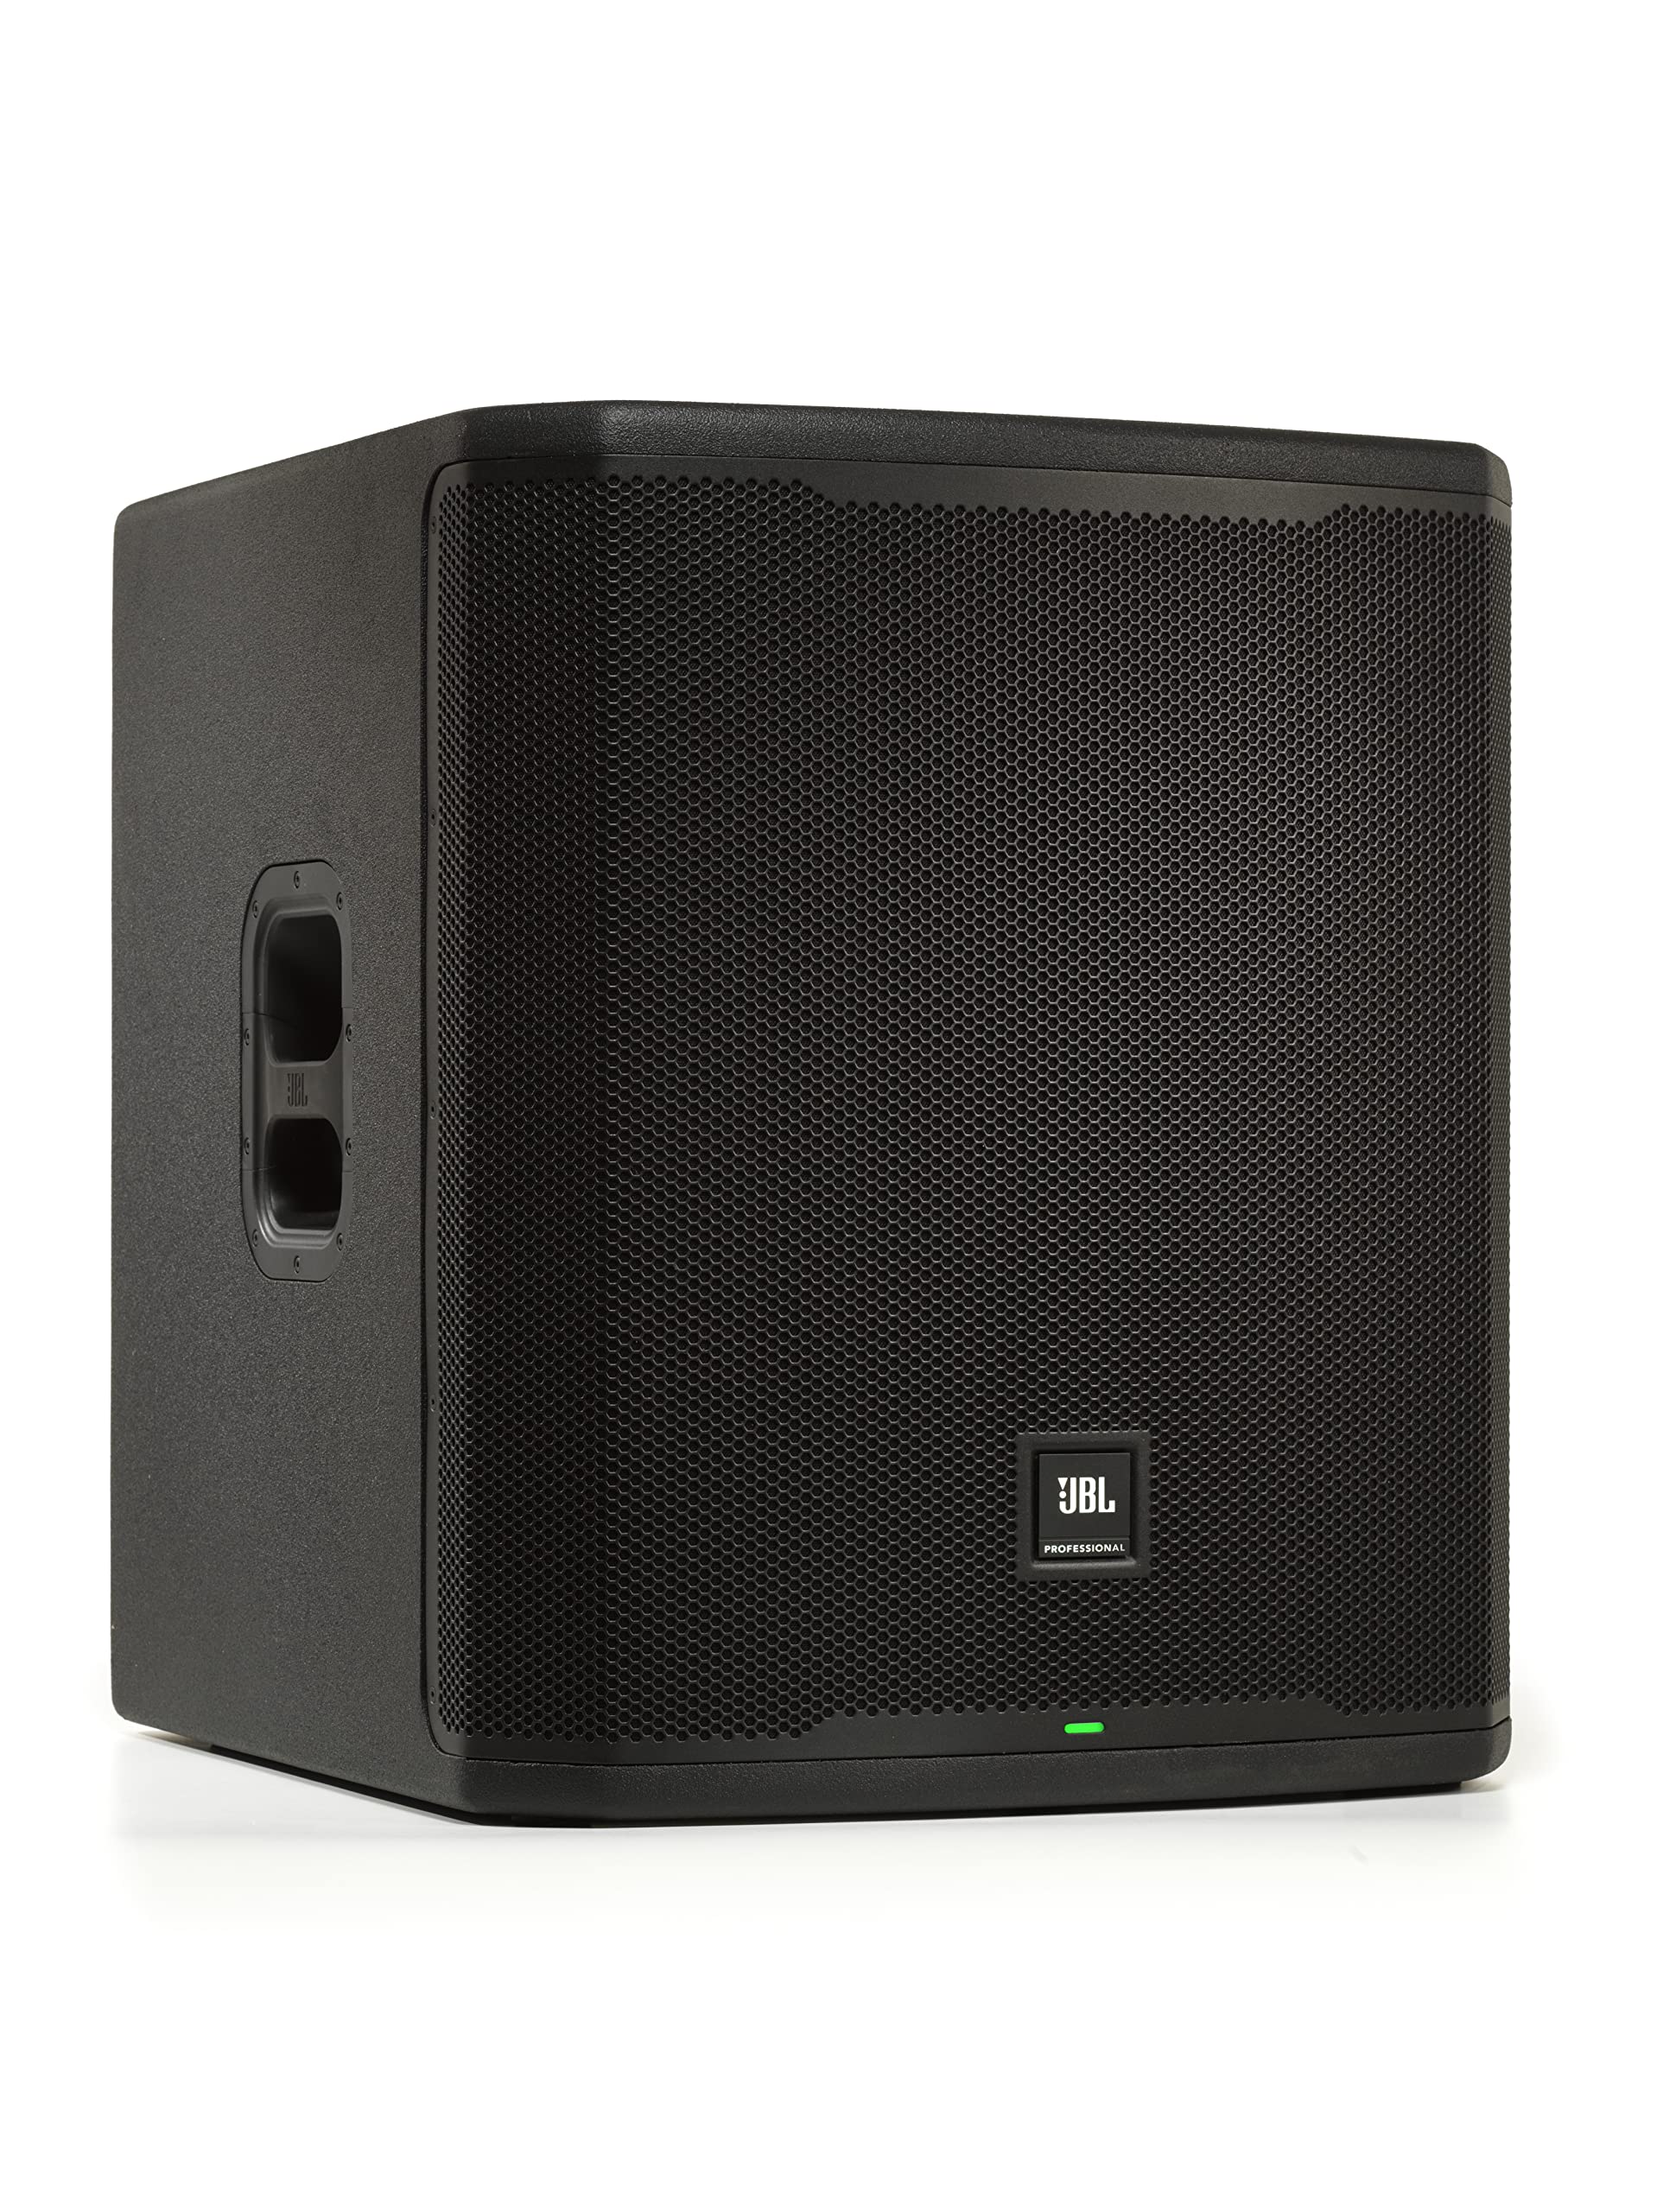 JBL subwoofer with power cord and pairing button